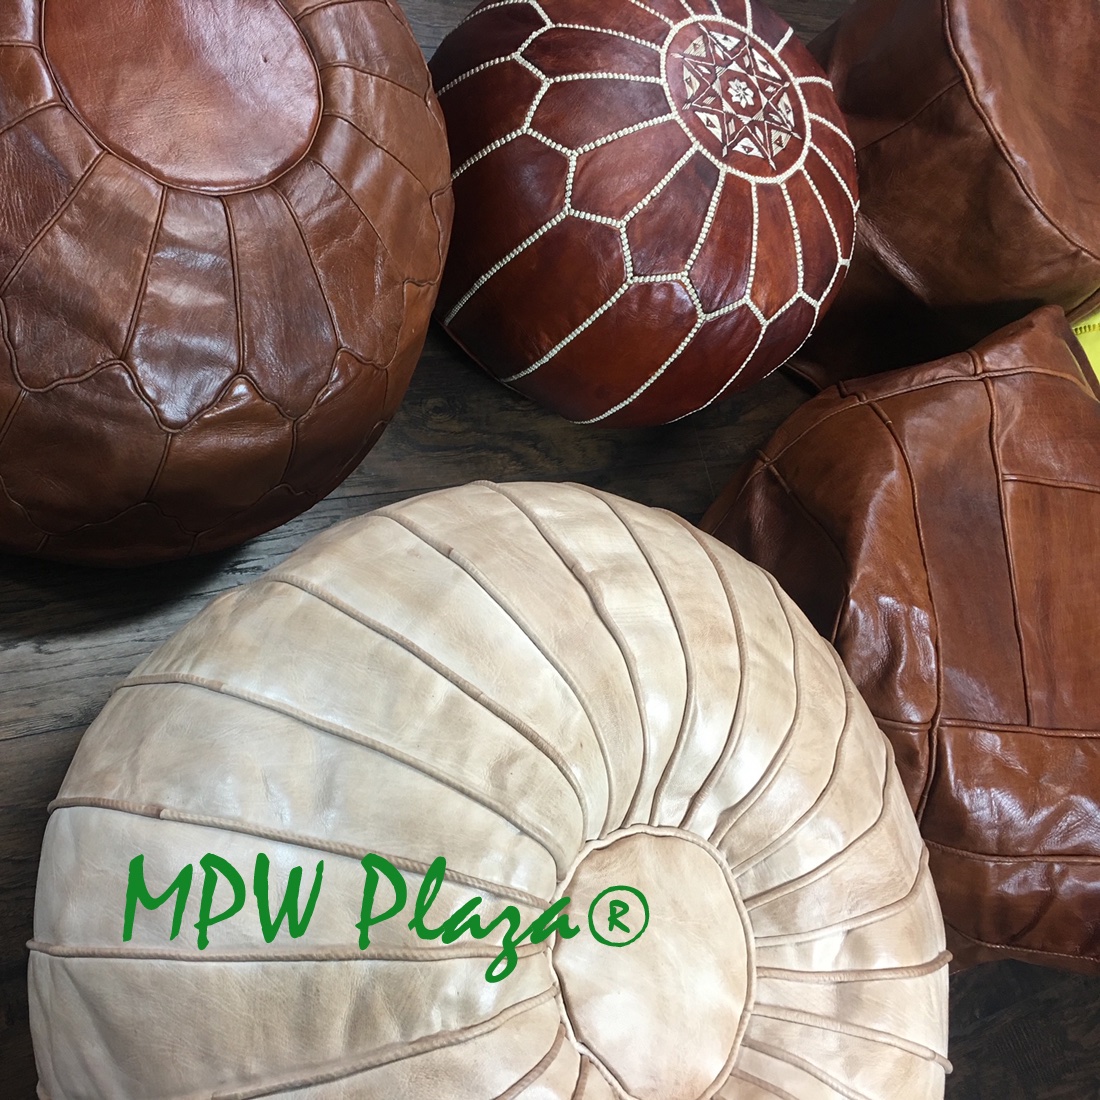 🎁 Treat yourself to a Premium MPW Plaza Moroccan Pouf 🌺  ships from USA 🌹
#luxuryhouses #luxurylifestyles #luxurygirl #luxurylivingroom #luxurystyle #luxuryapartments #luxuryshopping #luxuryshoes #luxurybags #luxurycollection #luxurycondos #luxurymansion #luxuryproperty